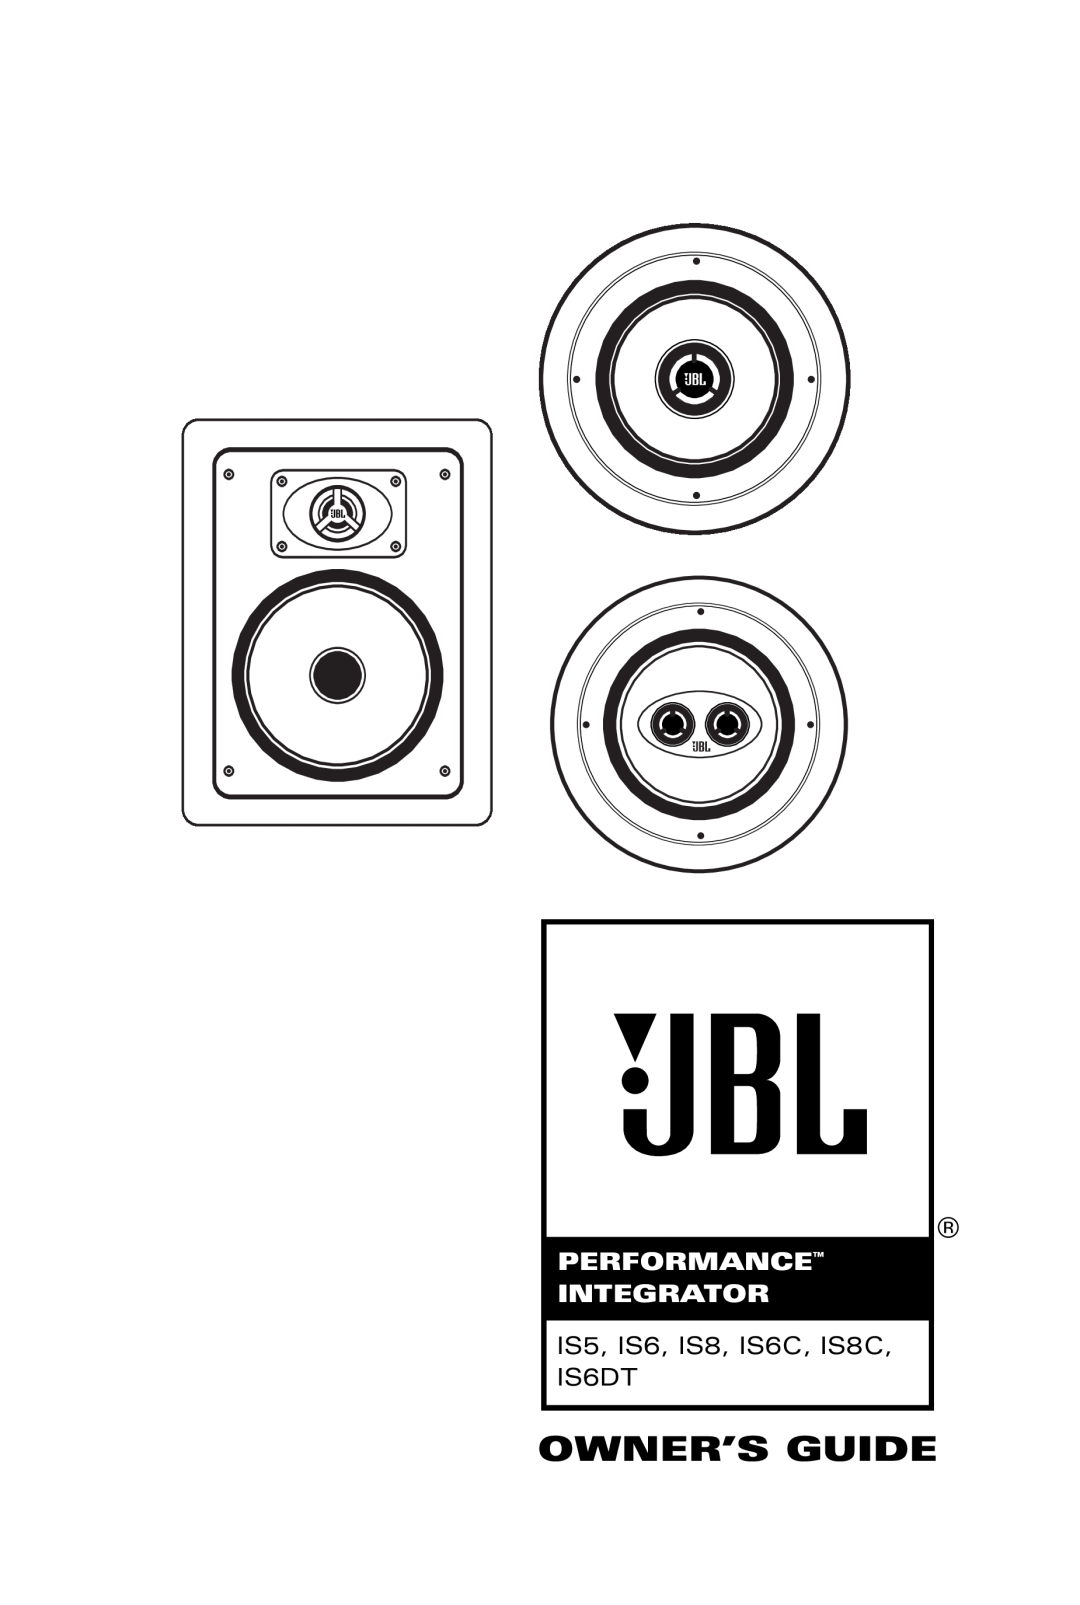 JBL manual Owner’S Guide, Performance Integrator, IS5, IS6, IS8, IS6C, IS8C, IS6DT 